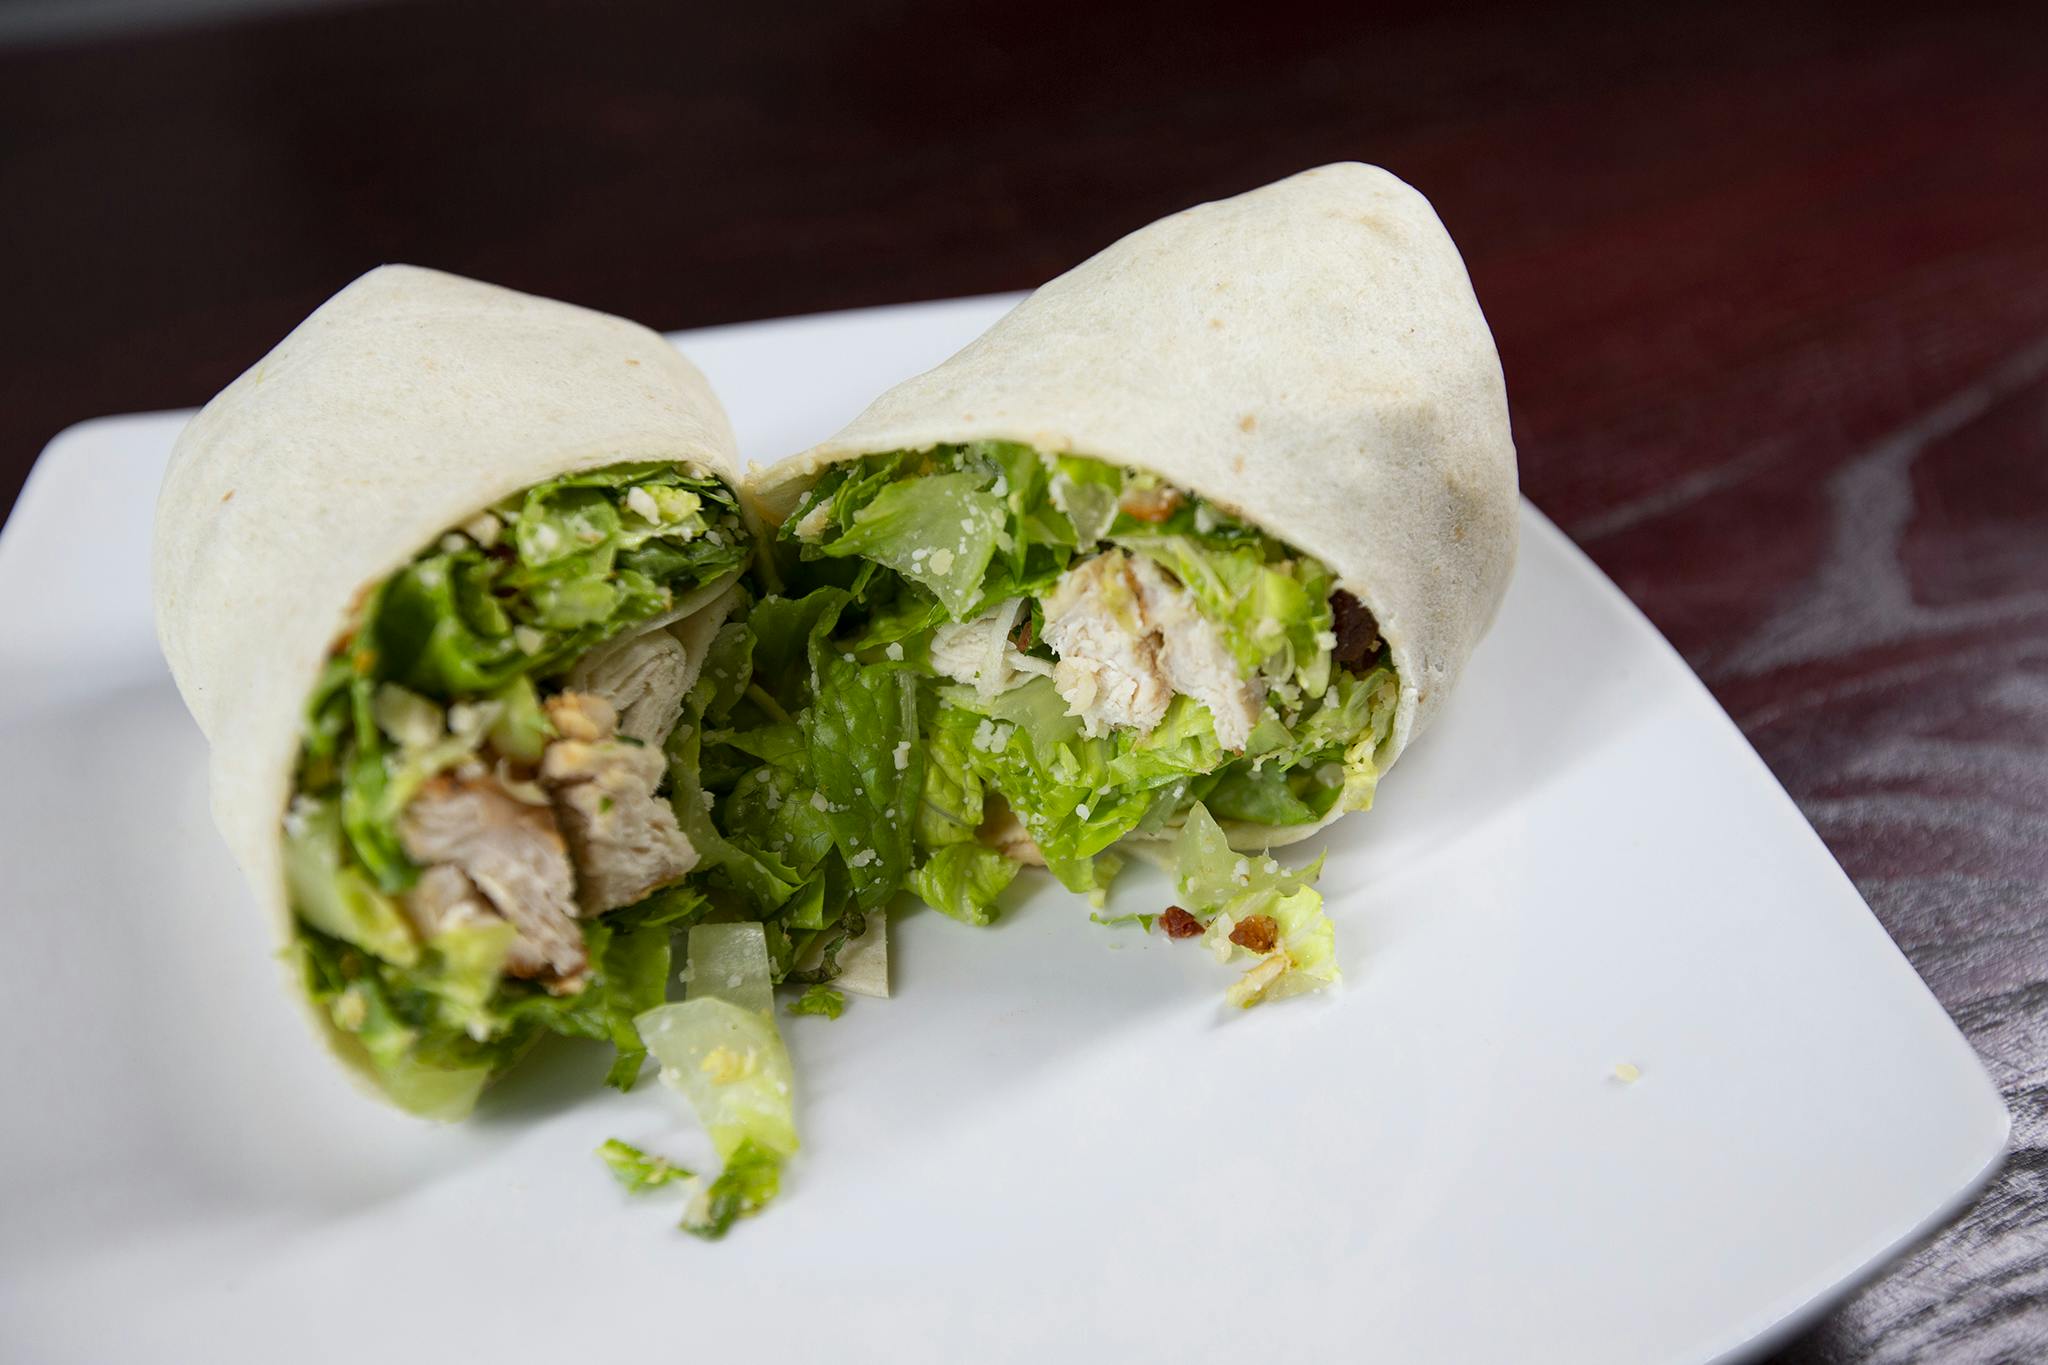 Firehouse Ceasar Salad Wrap from Firehouse Grill - Chicago Ave in Evanston, IL